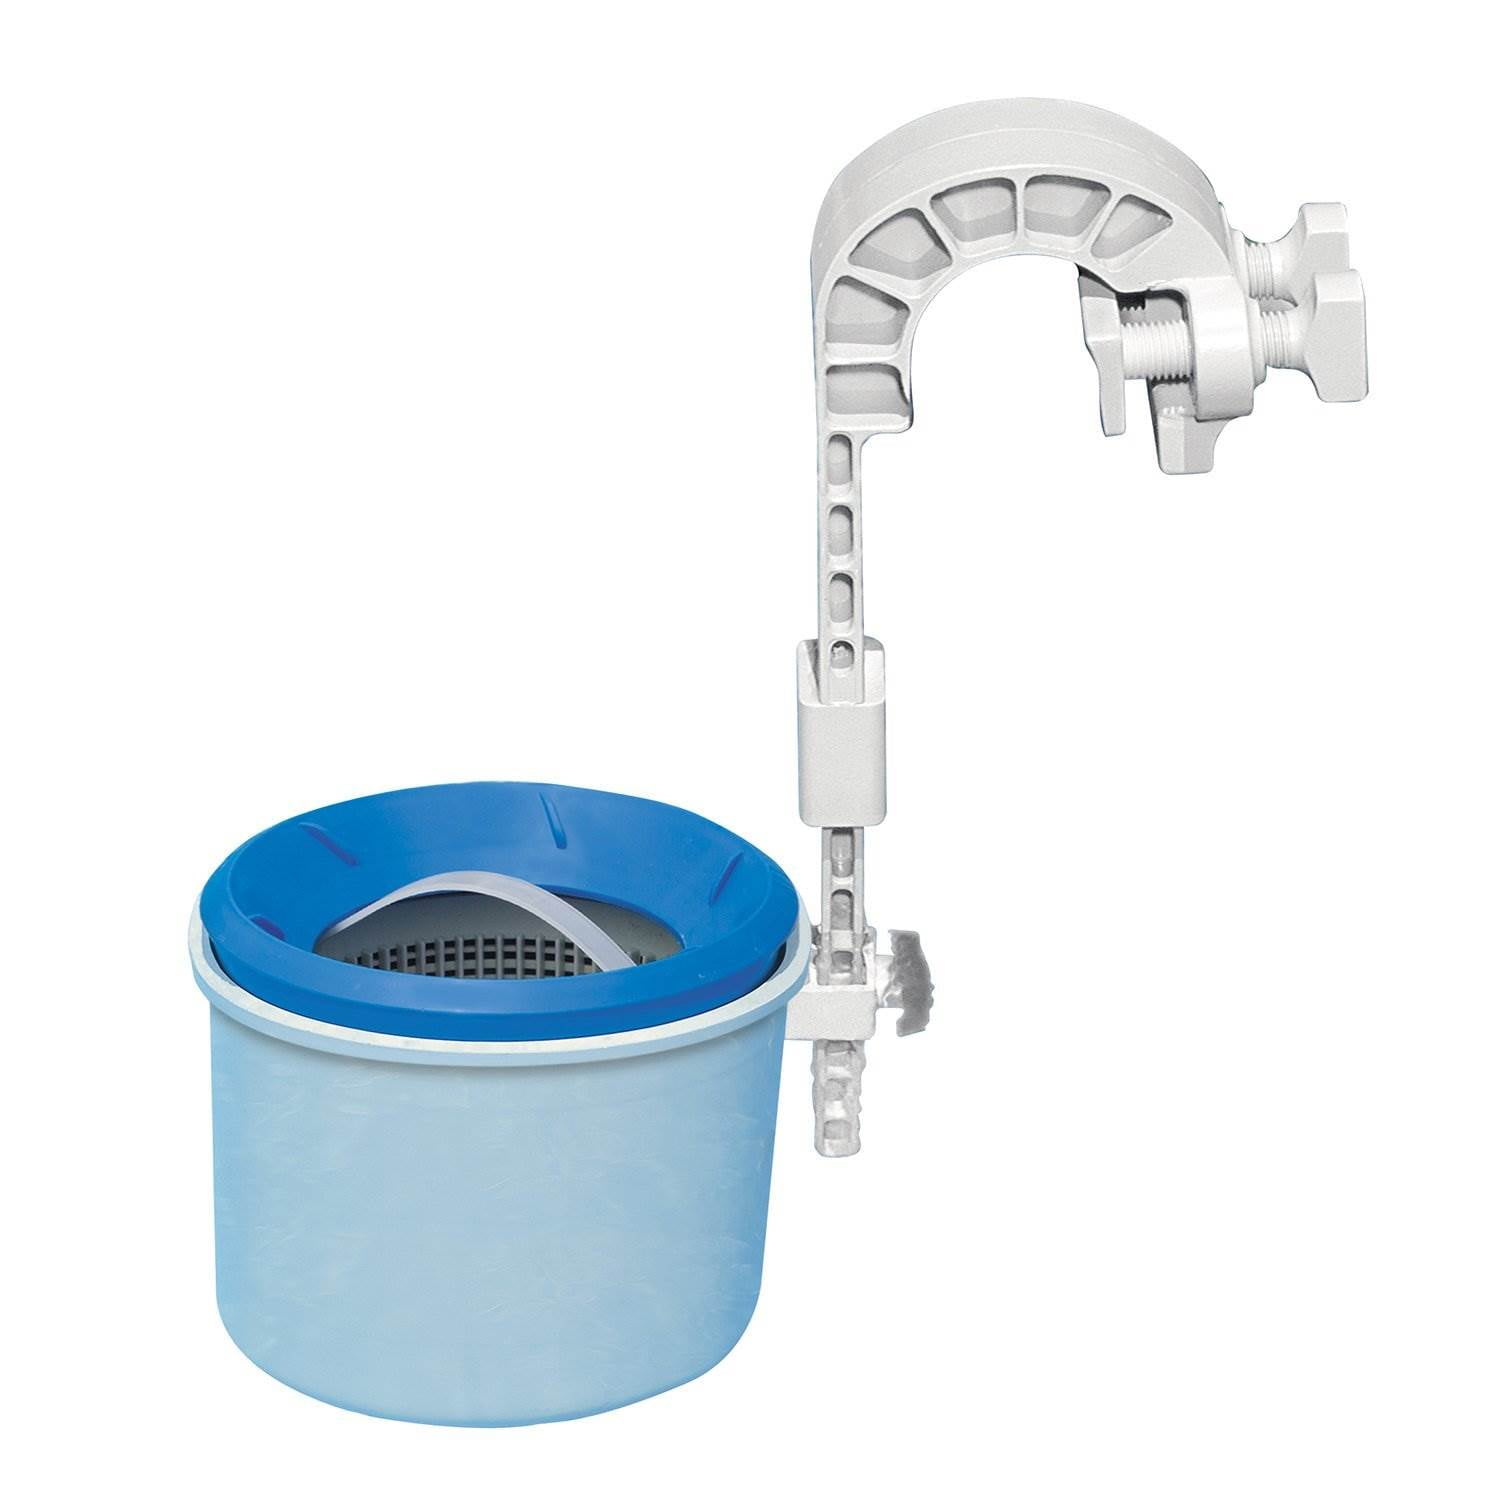 Baocai 2021New Swimming Pool Surface Skimmer,Wall Mounted Automatic Pool Cleaner Skimmer,Above Ground Pools Attracts Floating Debris for Pool Filter Systems